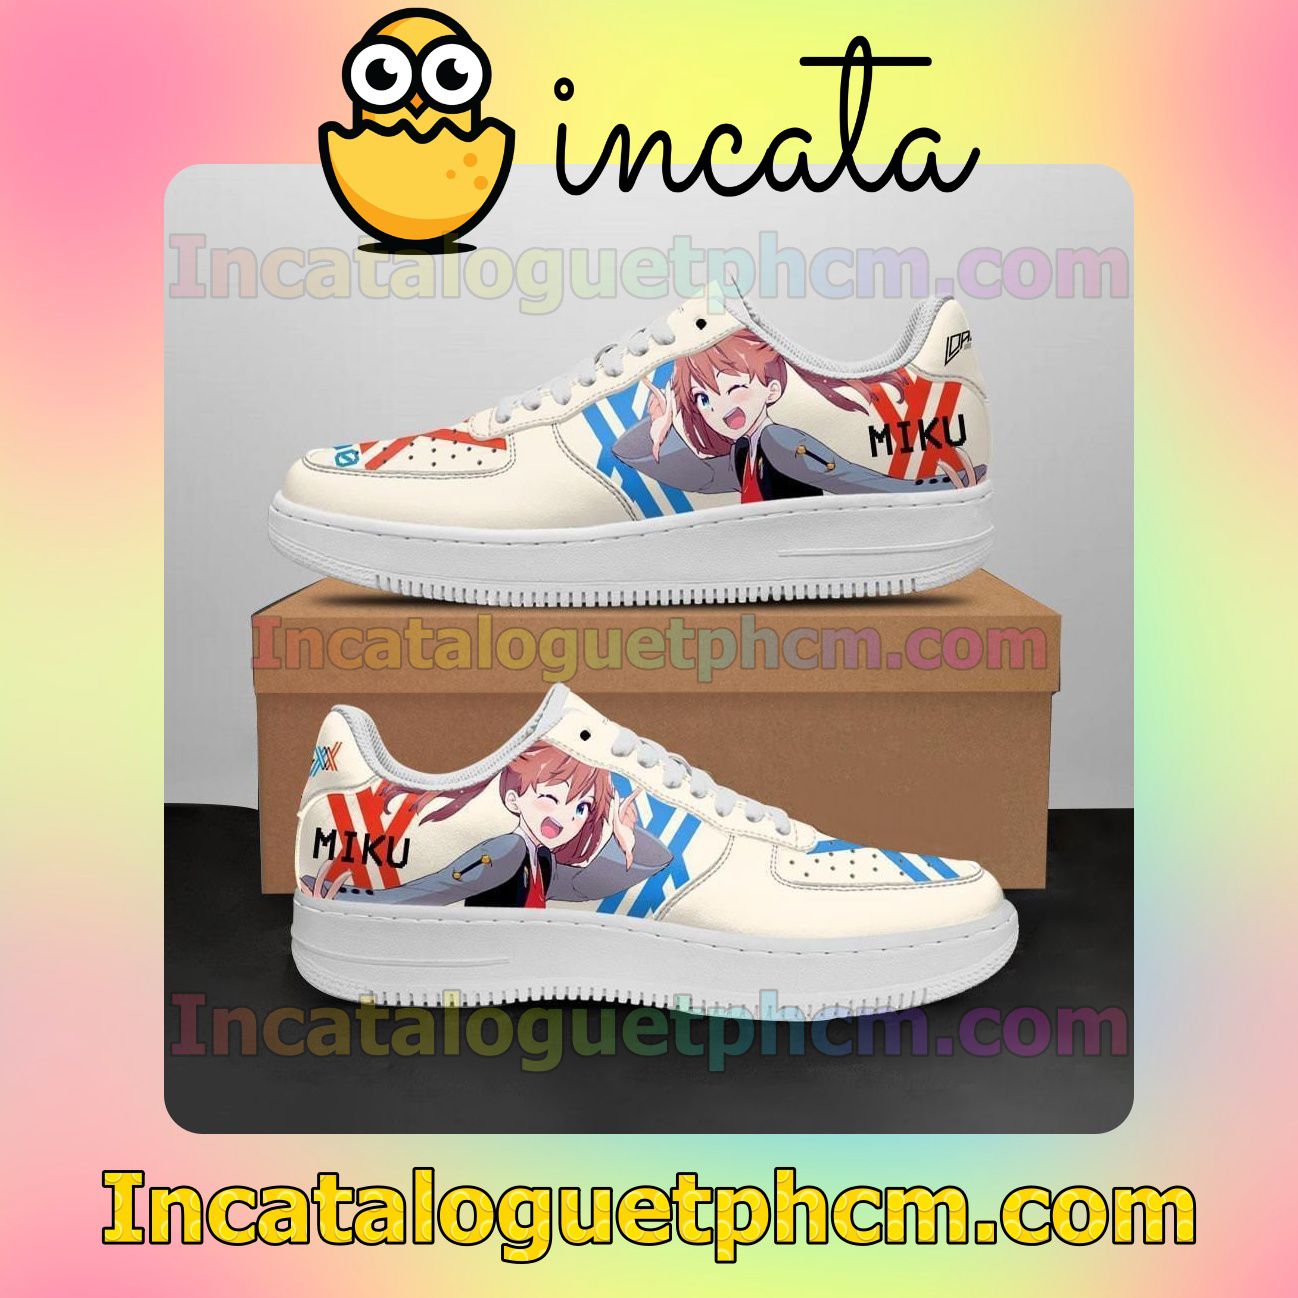 Darling In The Franxx Code 390 Miku Anime Nike Low Shoes Sneakers